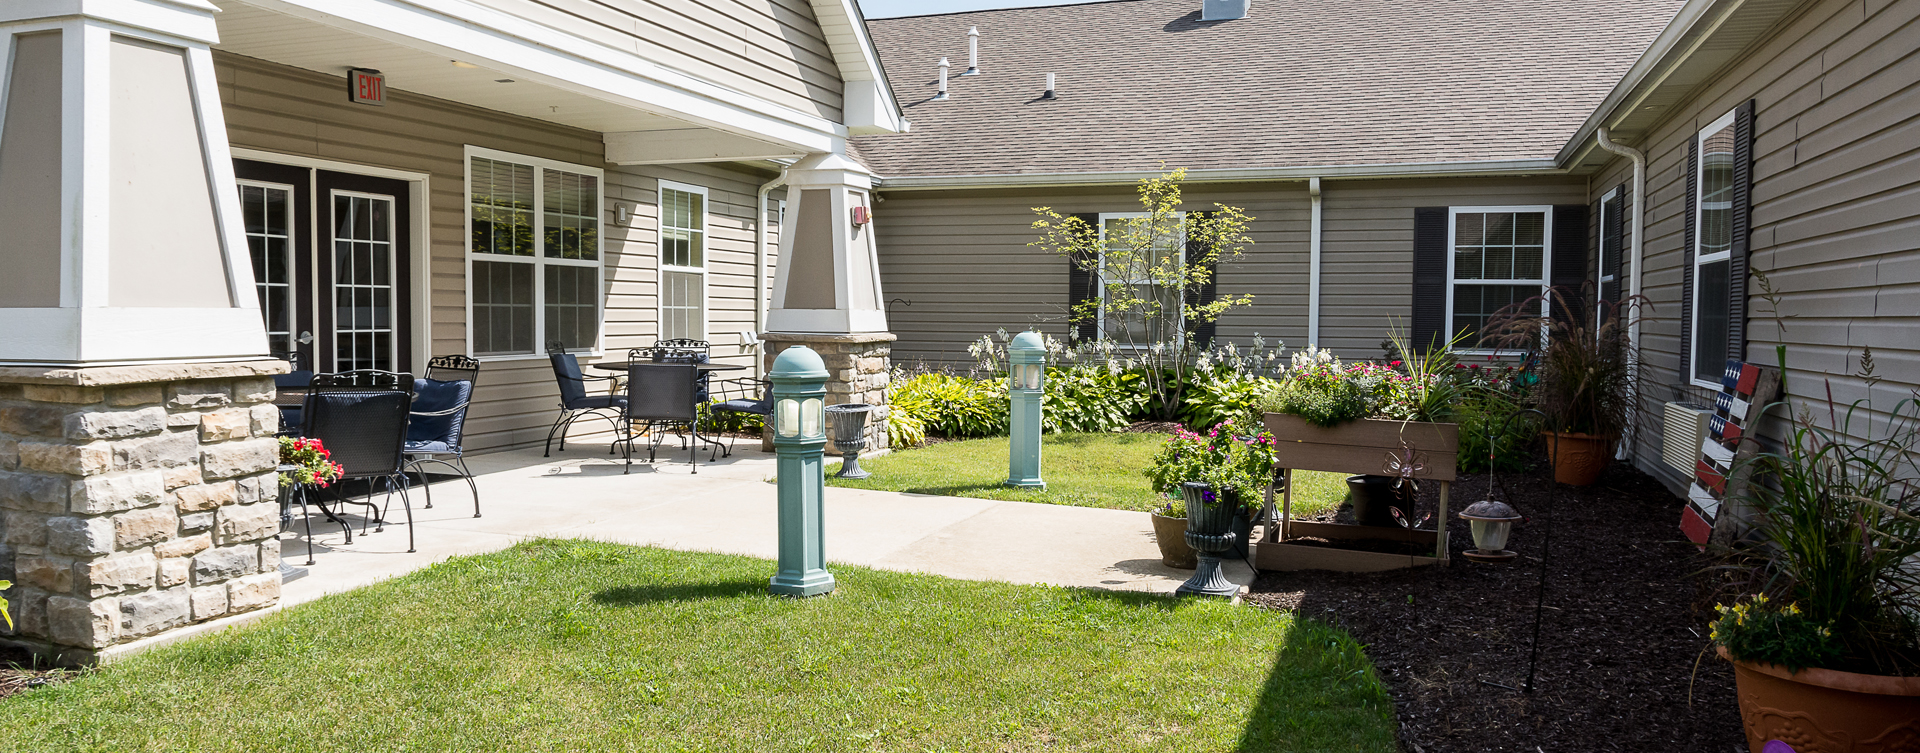 A single entrance courtyard gives residents with dementia the opportunity to be safe outside at Bickford of Oswego